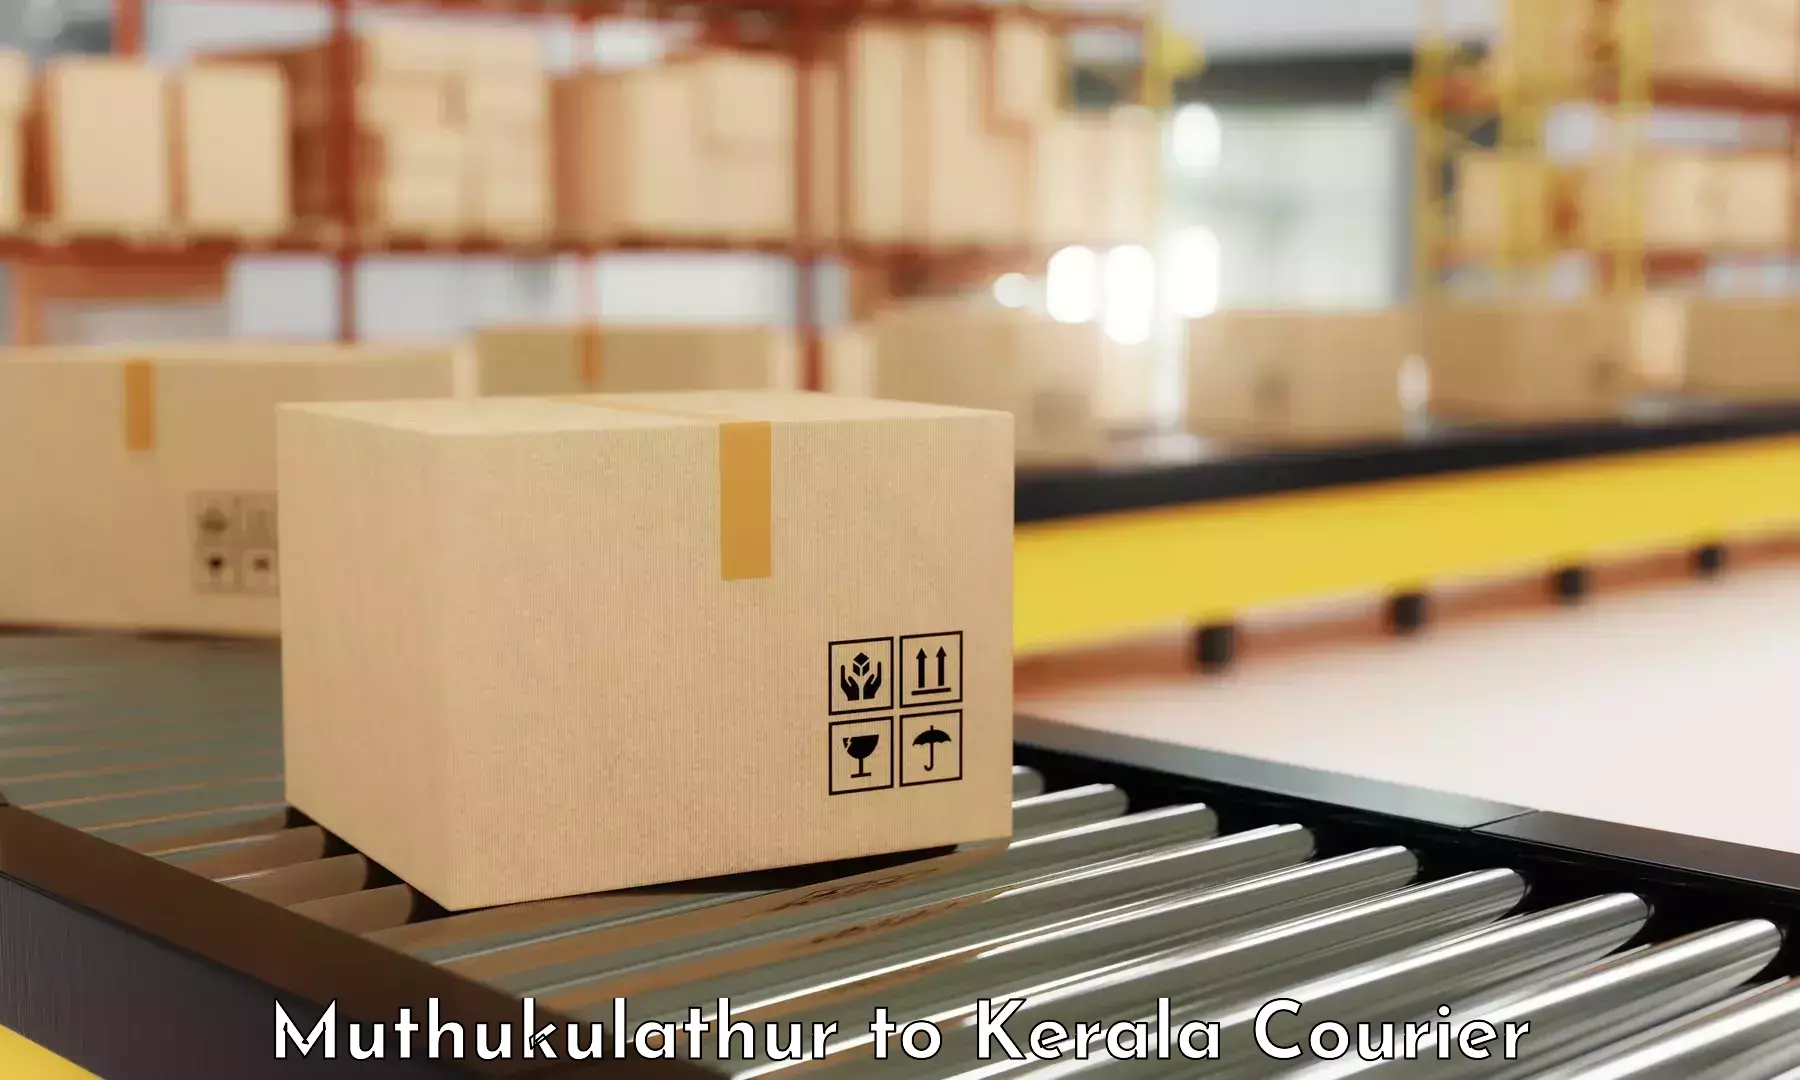 Seamless shipping experience Muthukulathur to Perumbavoor